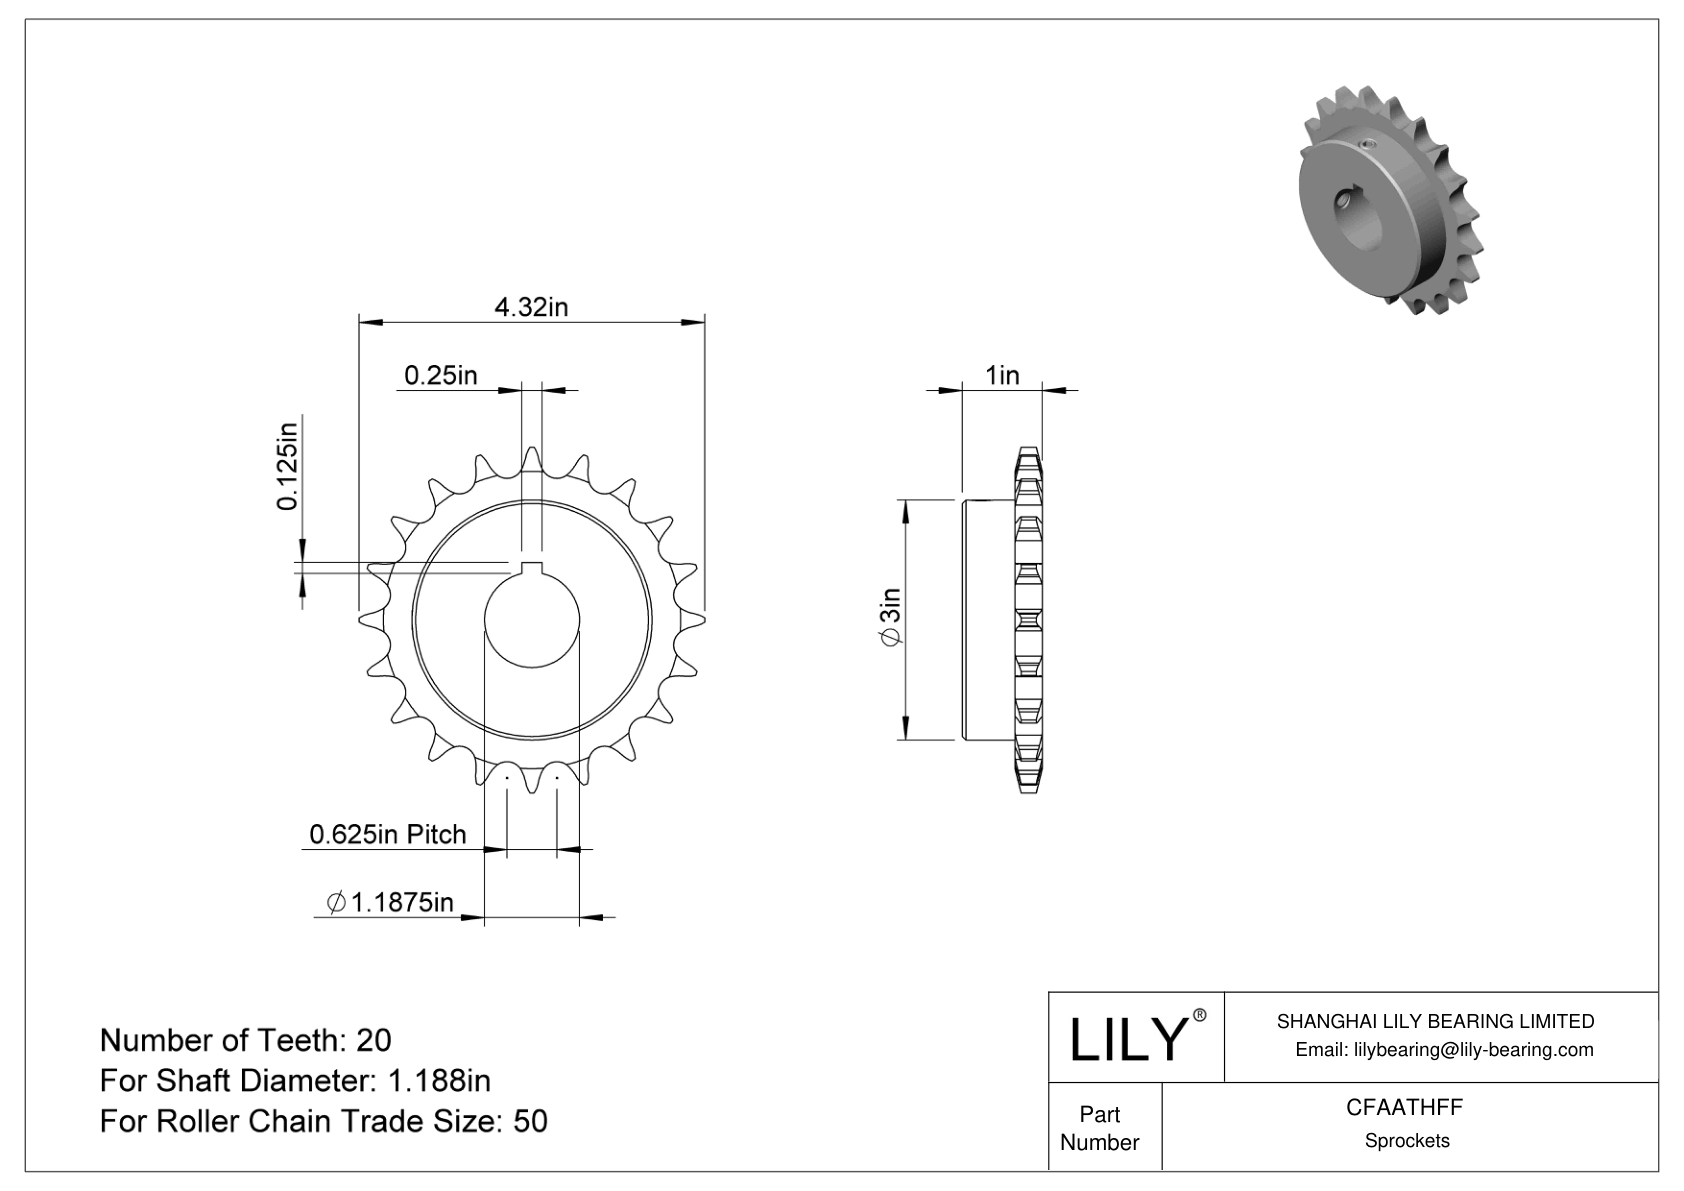 CFAATHFF Wear-Resistant Sprockets for ANSI Roller Chain cad drawing